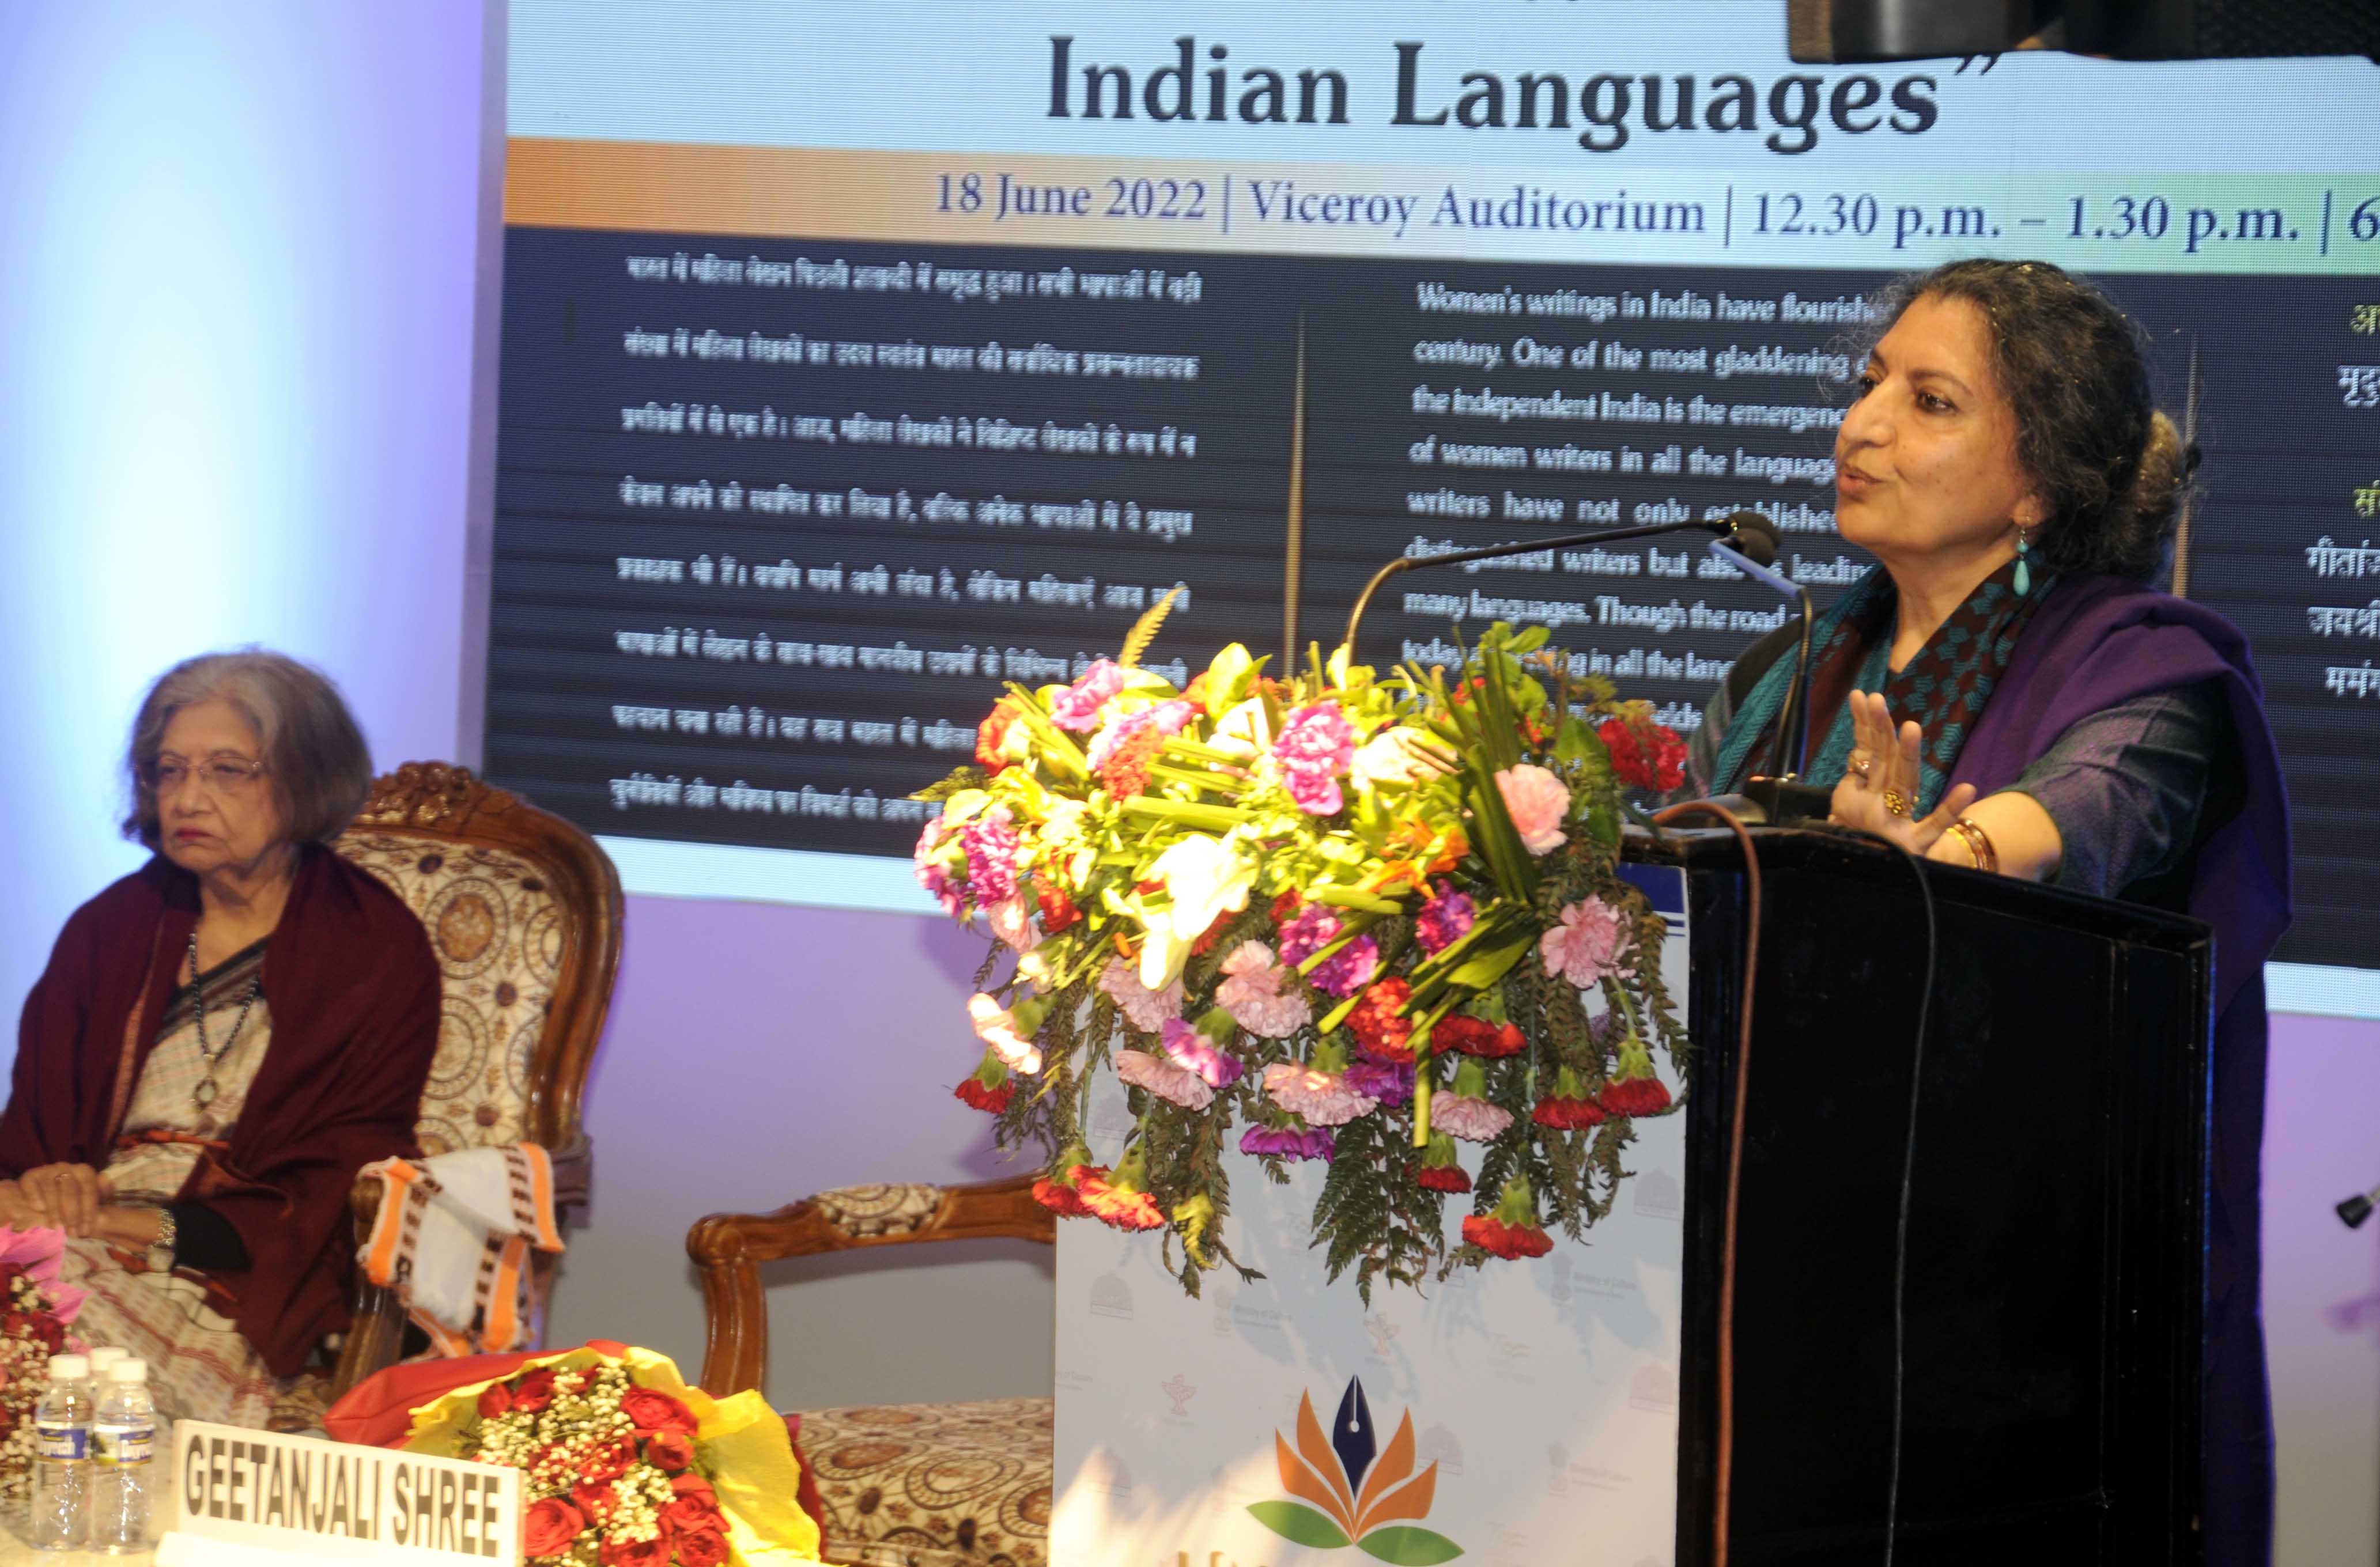 Literature should be available in all languages: Geetanjali Shree